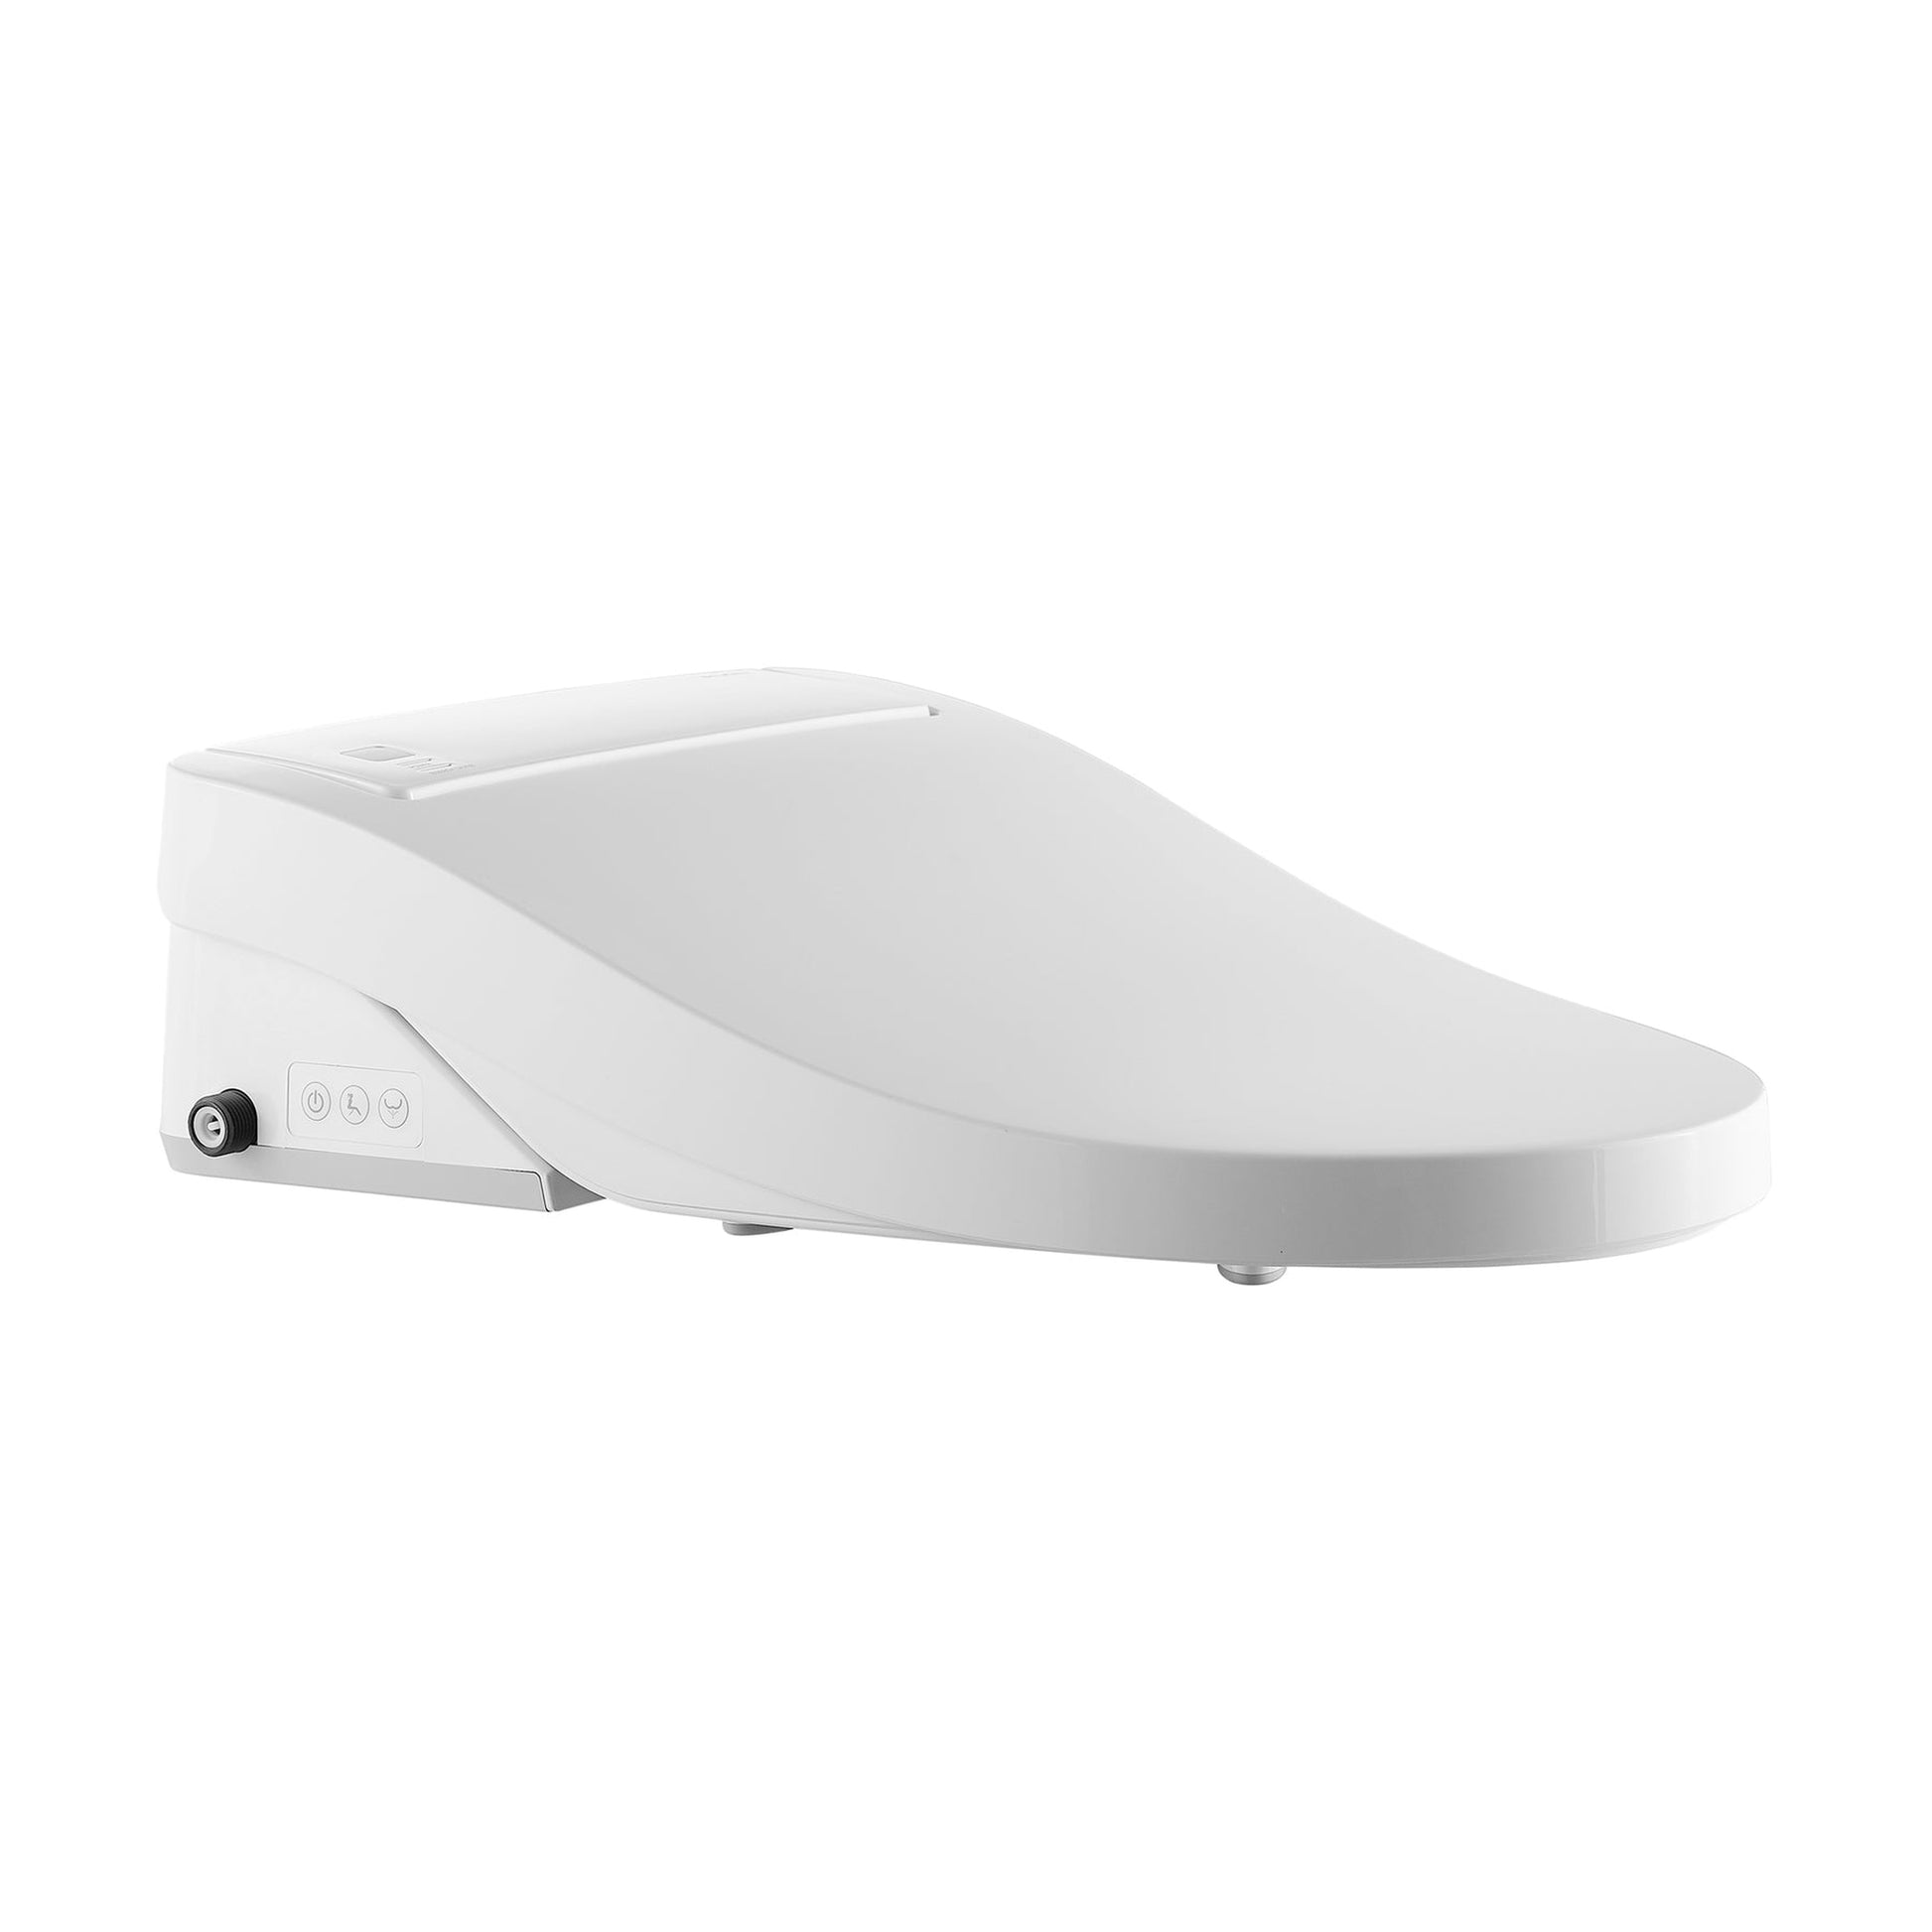 Swiss Madison Vivante 15" White Closed Front Elongated Smart Toilet Seat Bidet With Lid and Remote Control